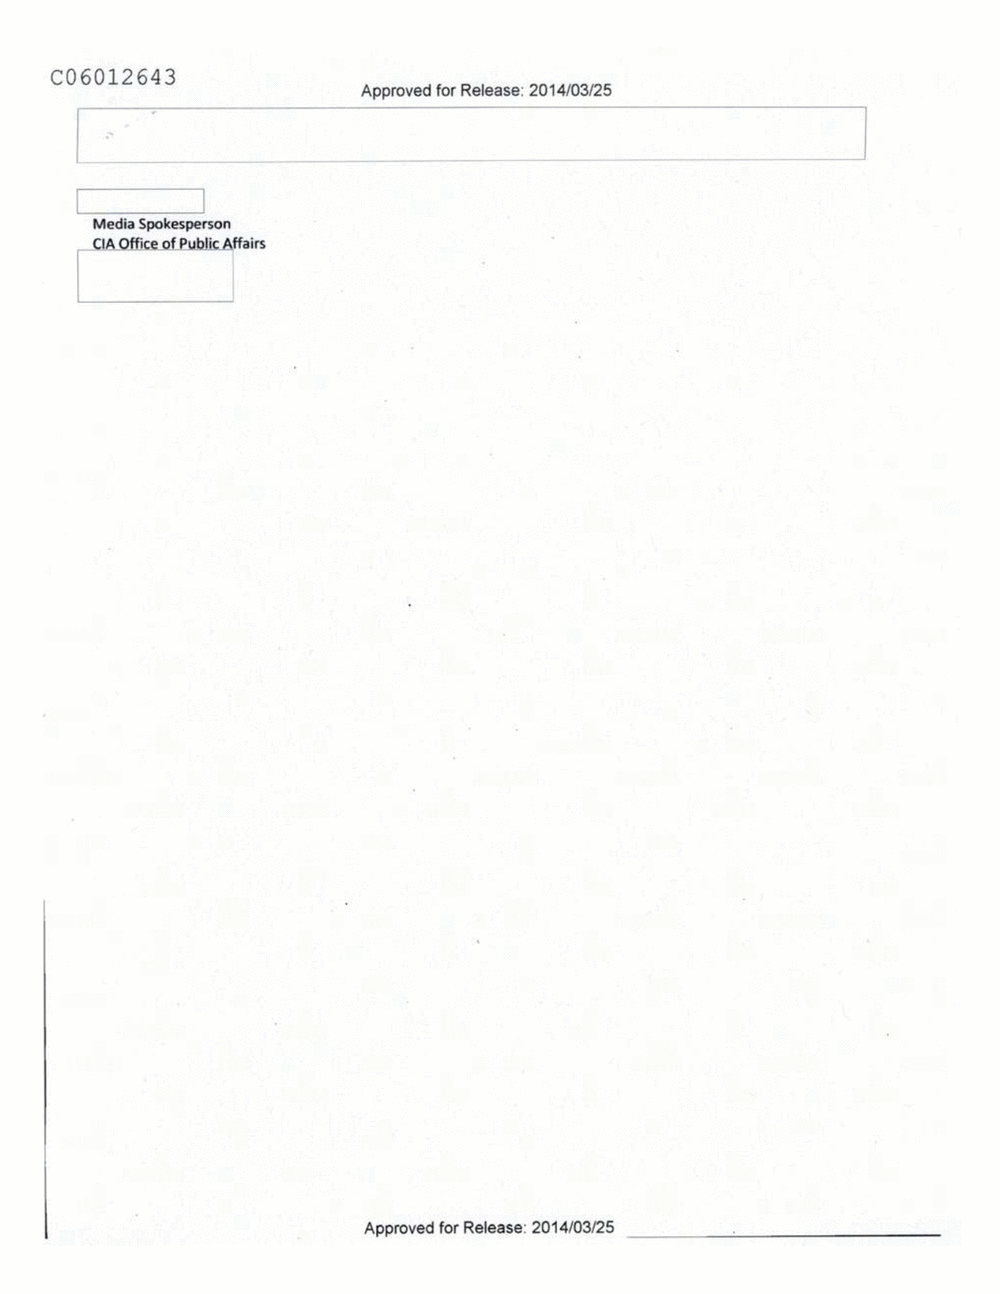 Page 211 from Email Correspondence Between Reporters and CIA Flacks